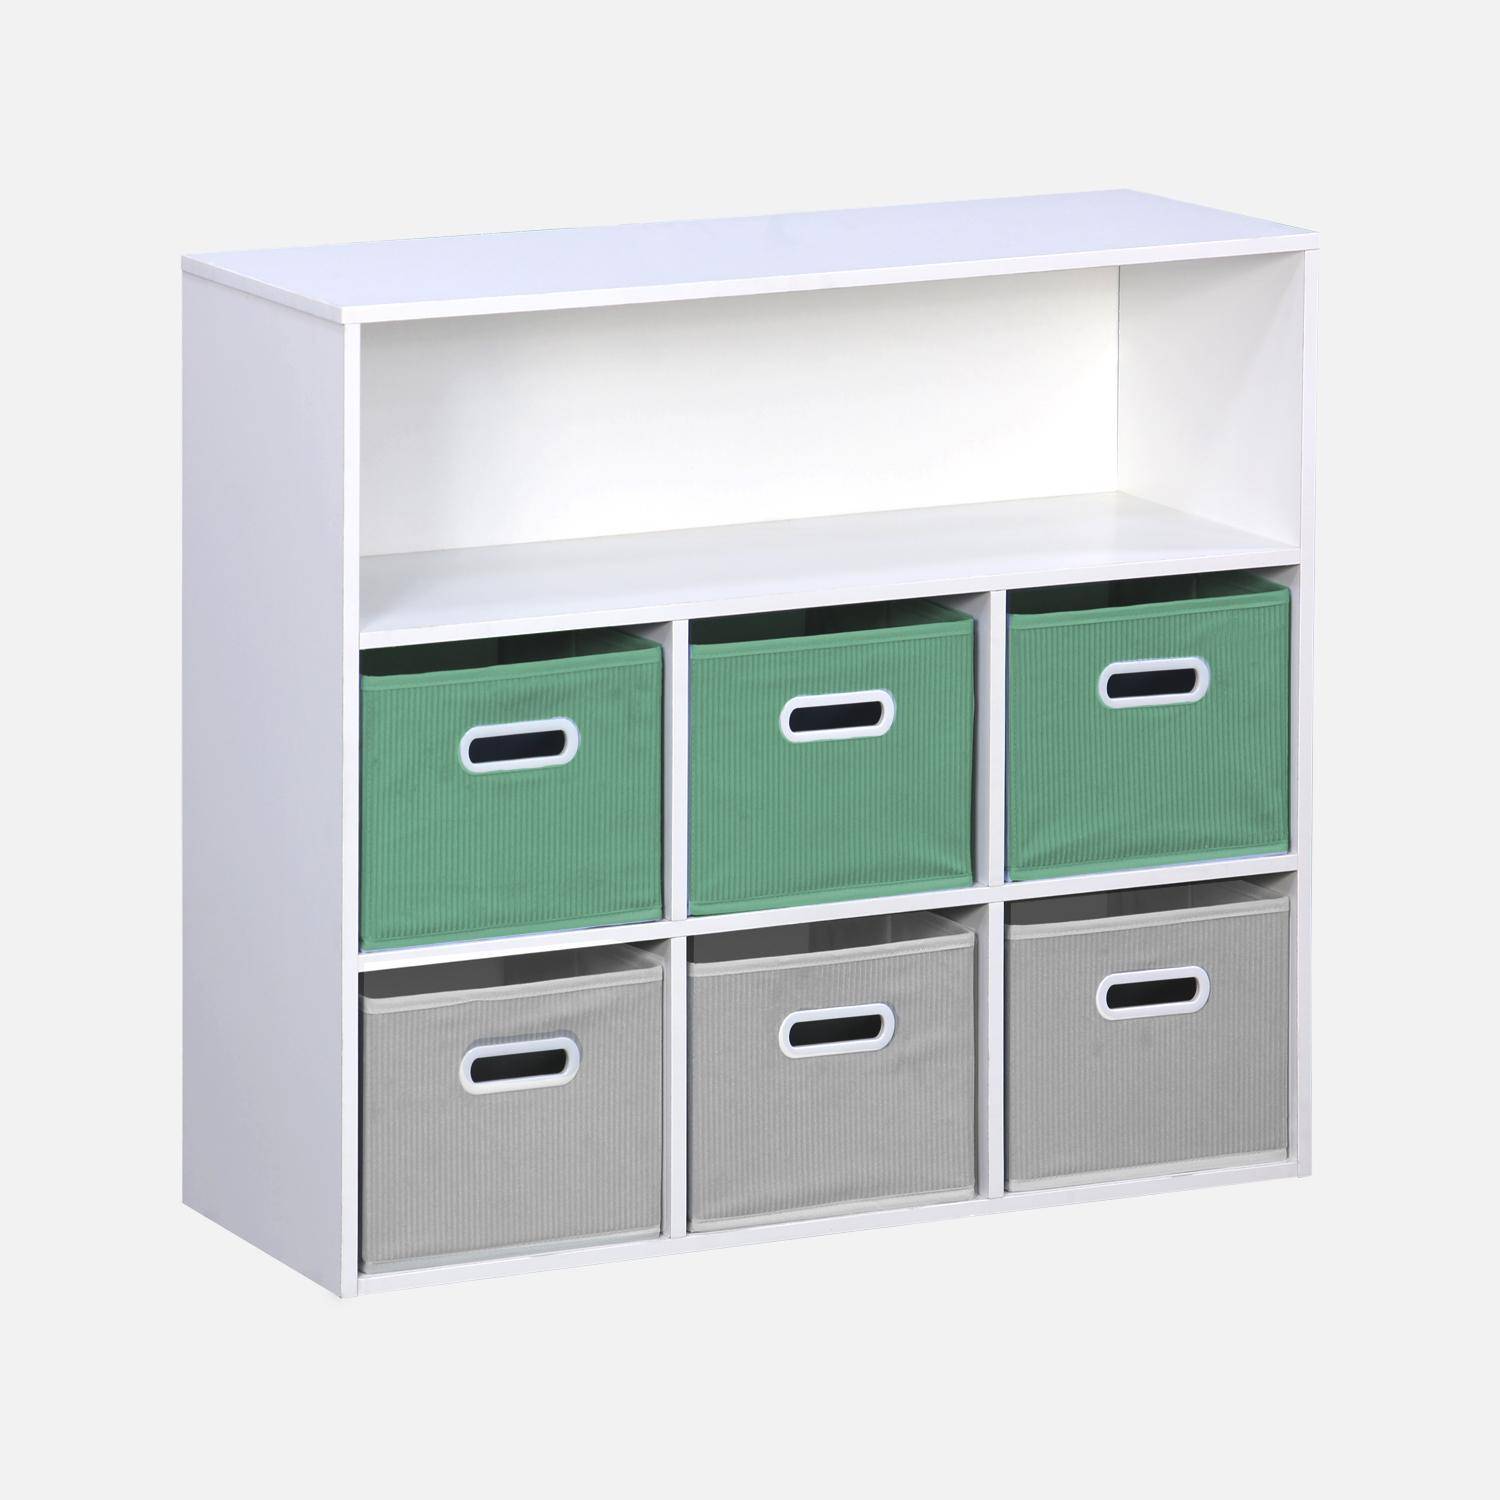 Storage unit for children with 7 compartments and 3 green baskets and 3 grey velvet baskets Photo1